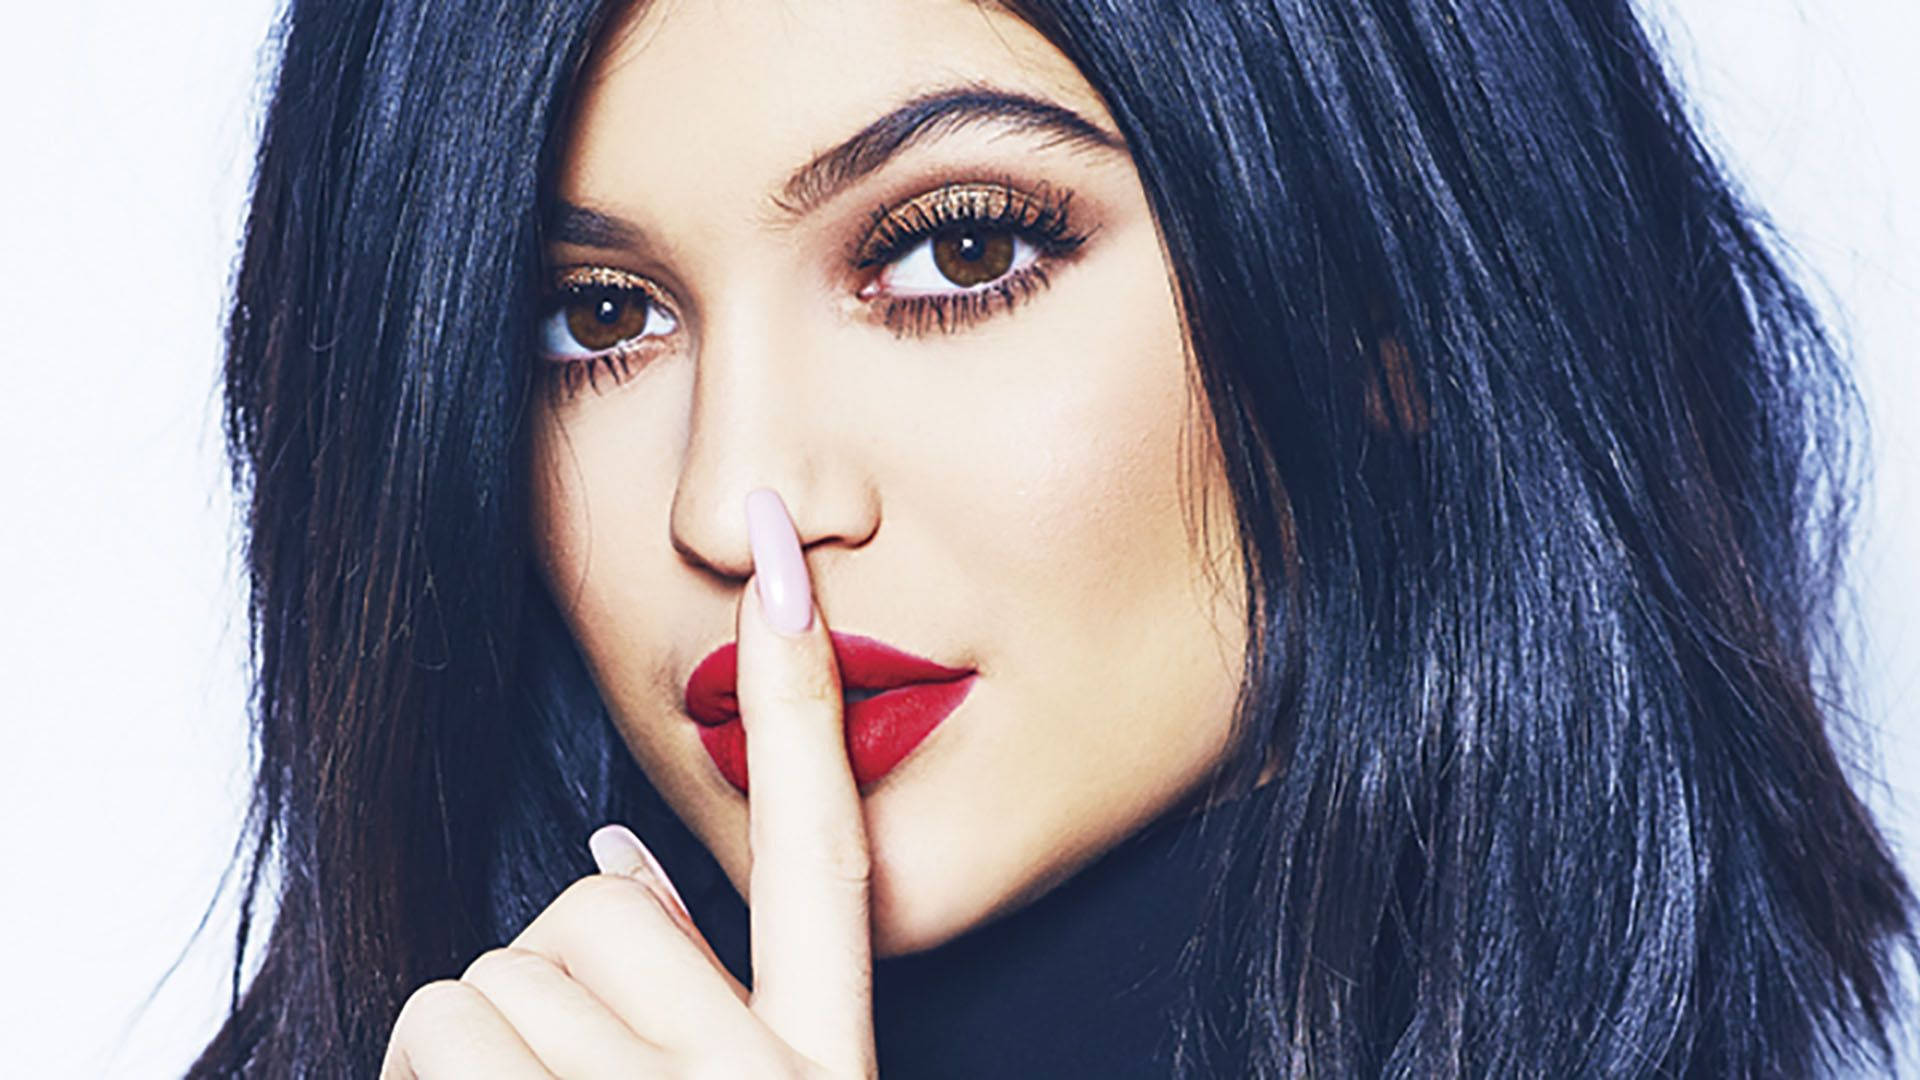 Cute Kylie Jenner In Red Lipstick Background